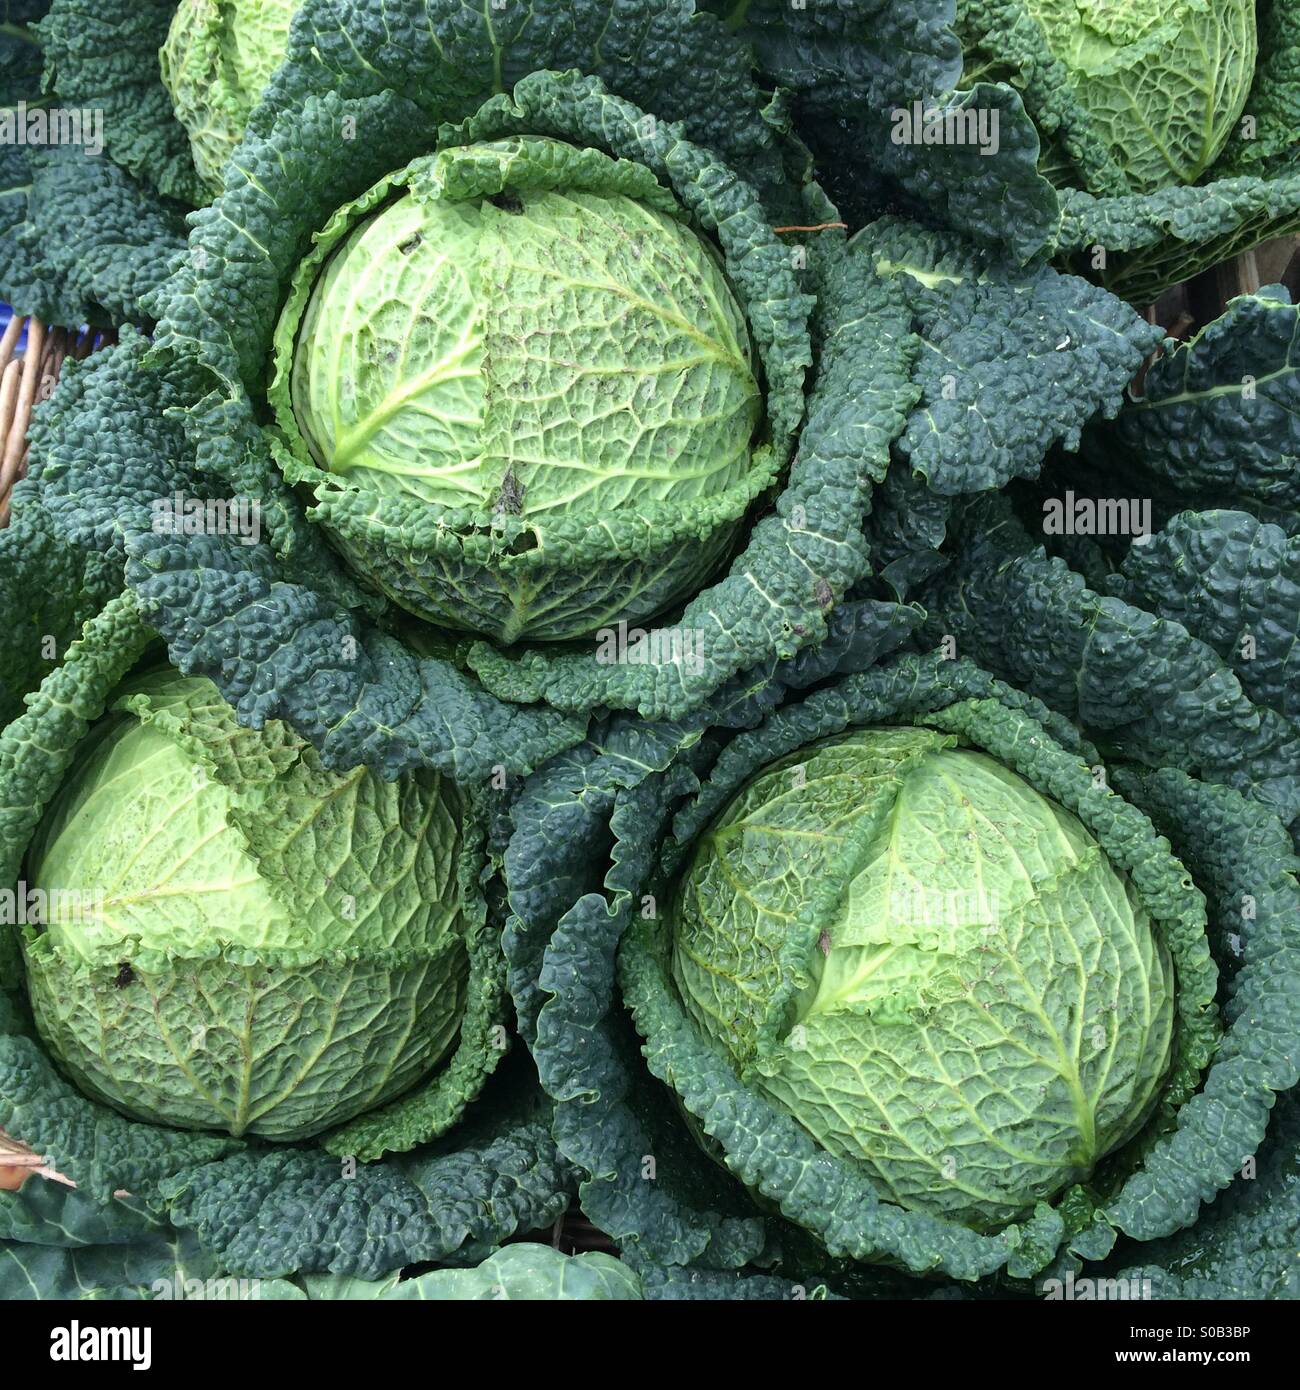 Cabbages for sale at a farmers market Stock Photo